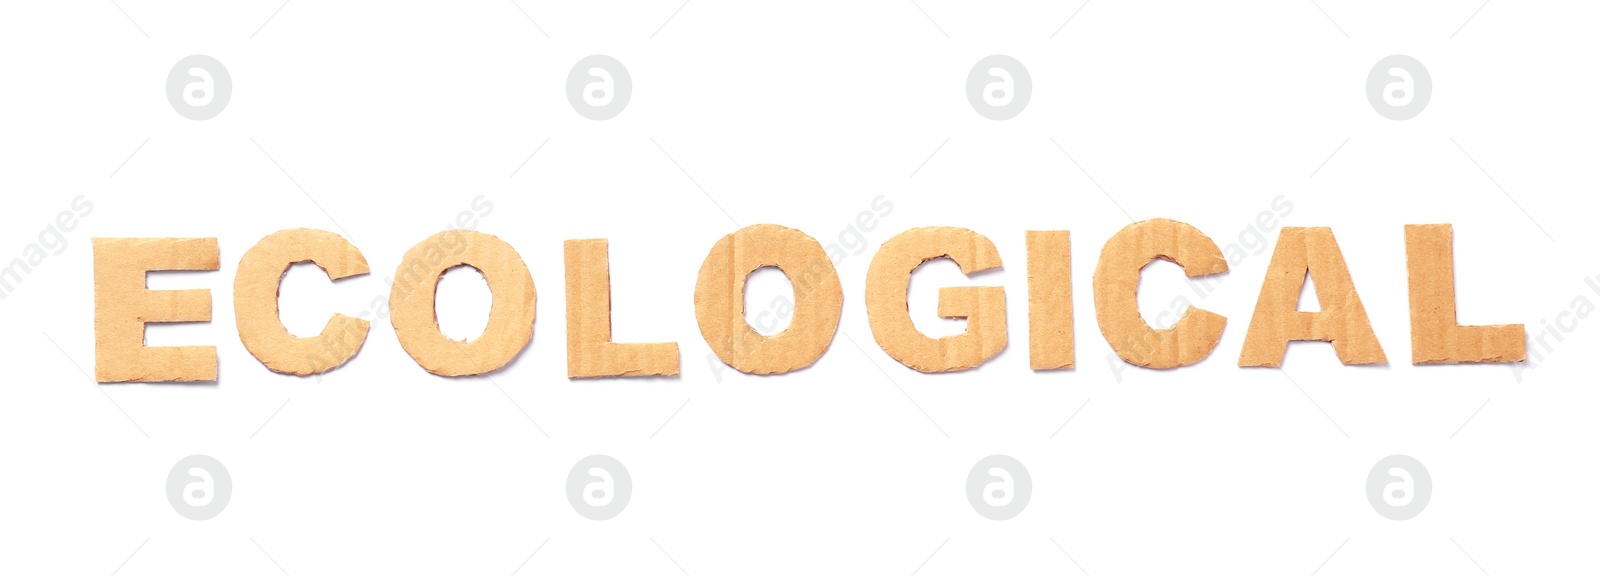 Photo of Word "Ecological" made of cardboard letters on white background